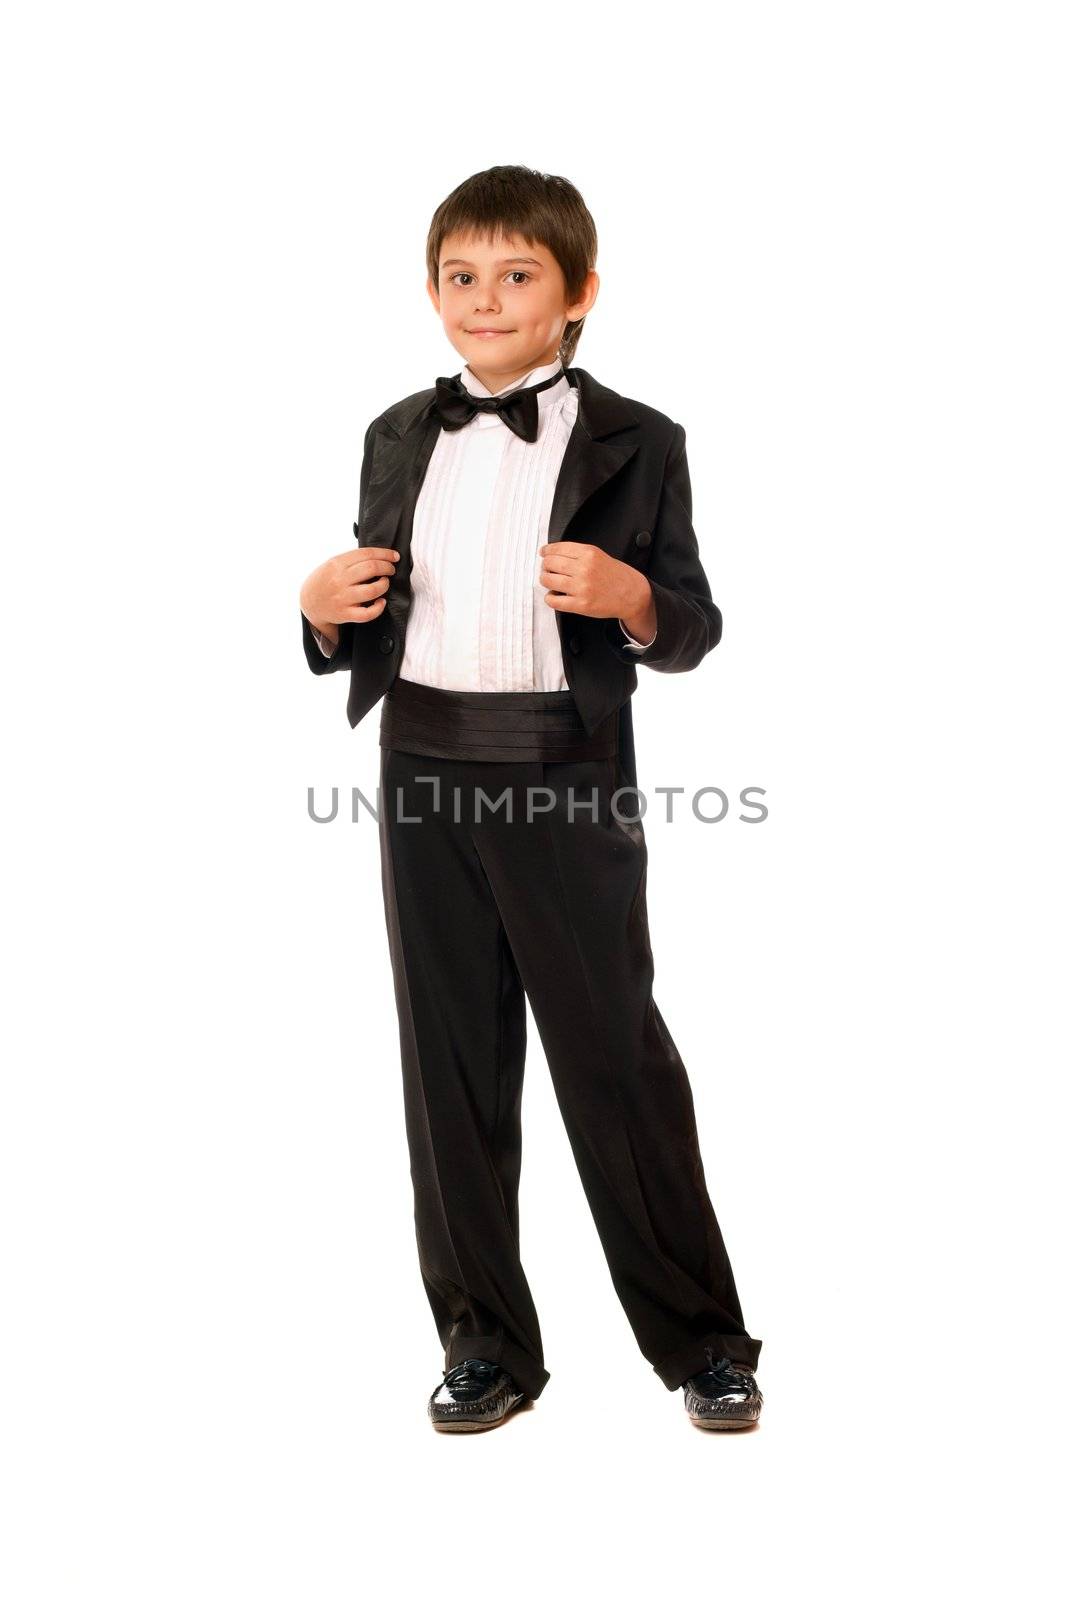 Handsome little boy in a tuxedo. Isolated